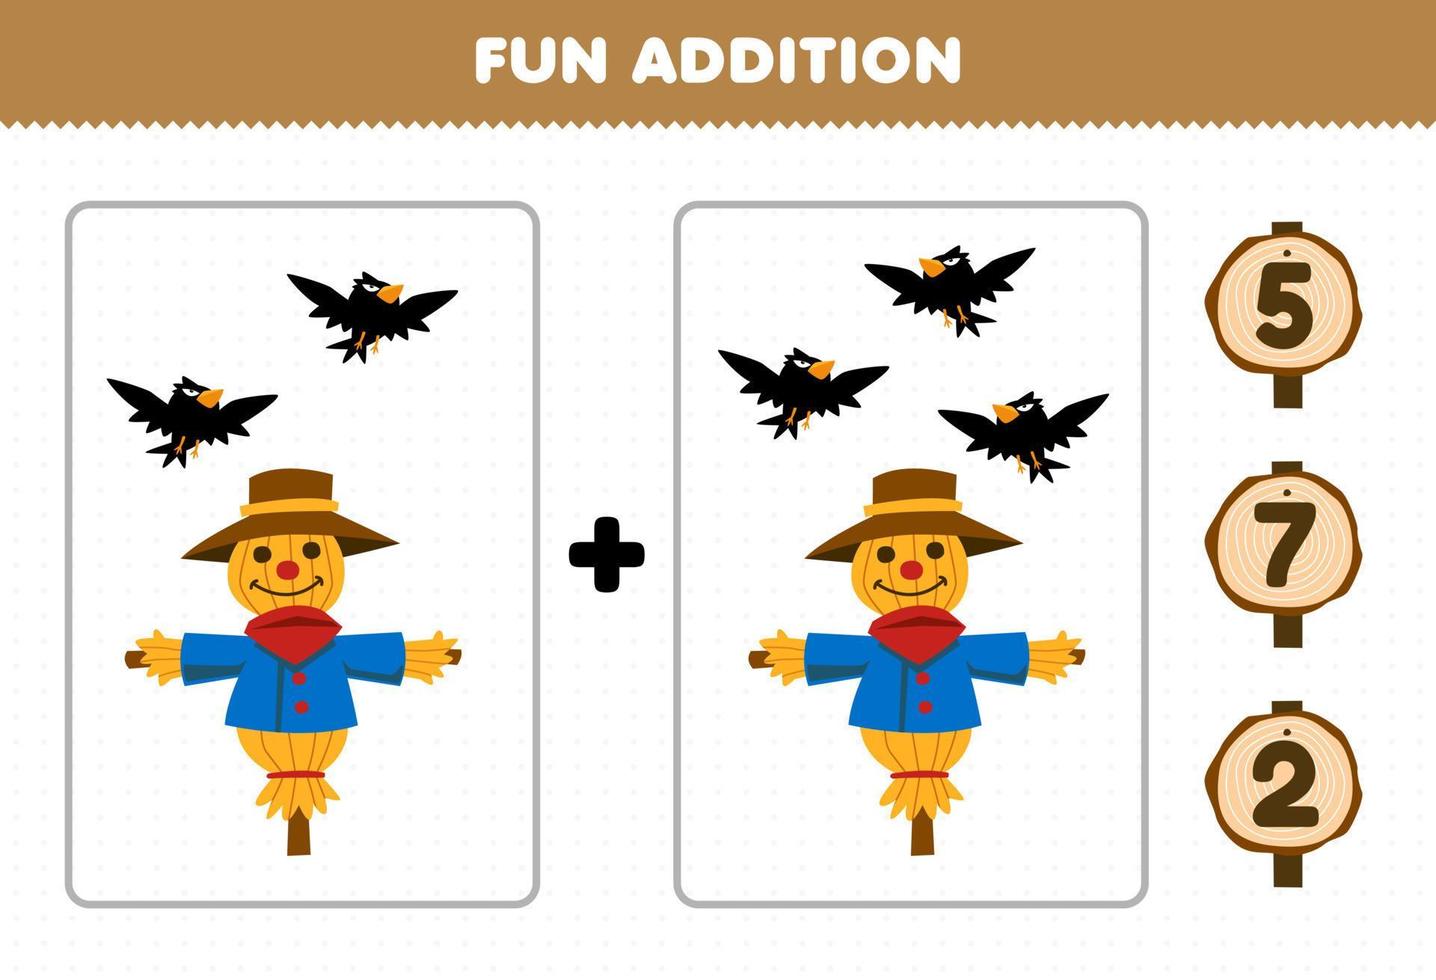 Education game for children fun addition by count and choose the correct answer of cute cartoon crow and scarecrow printable farm worksheet vector